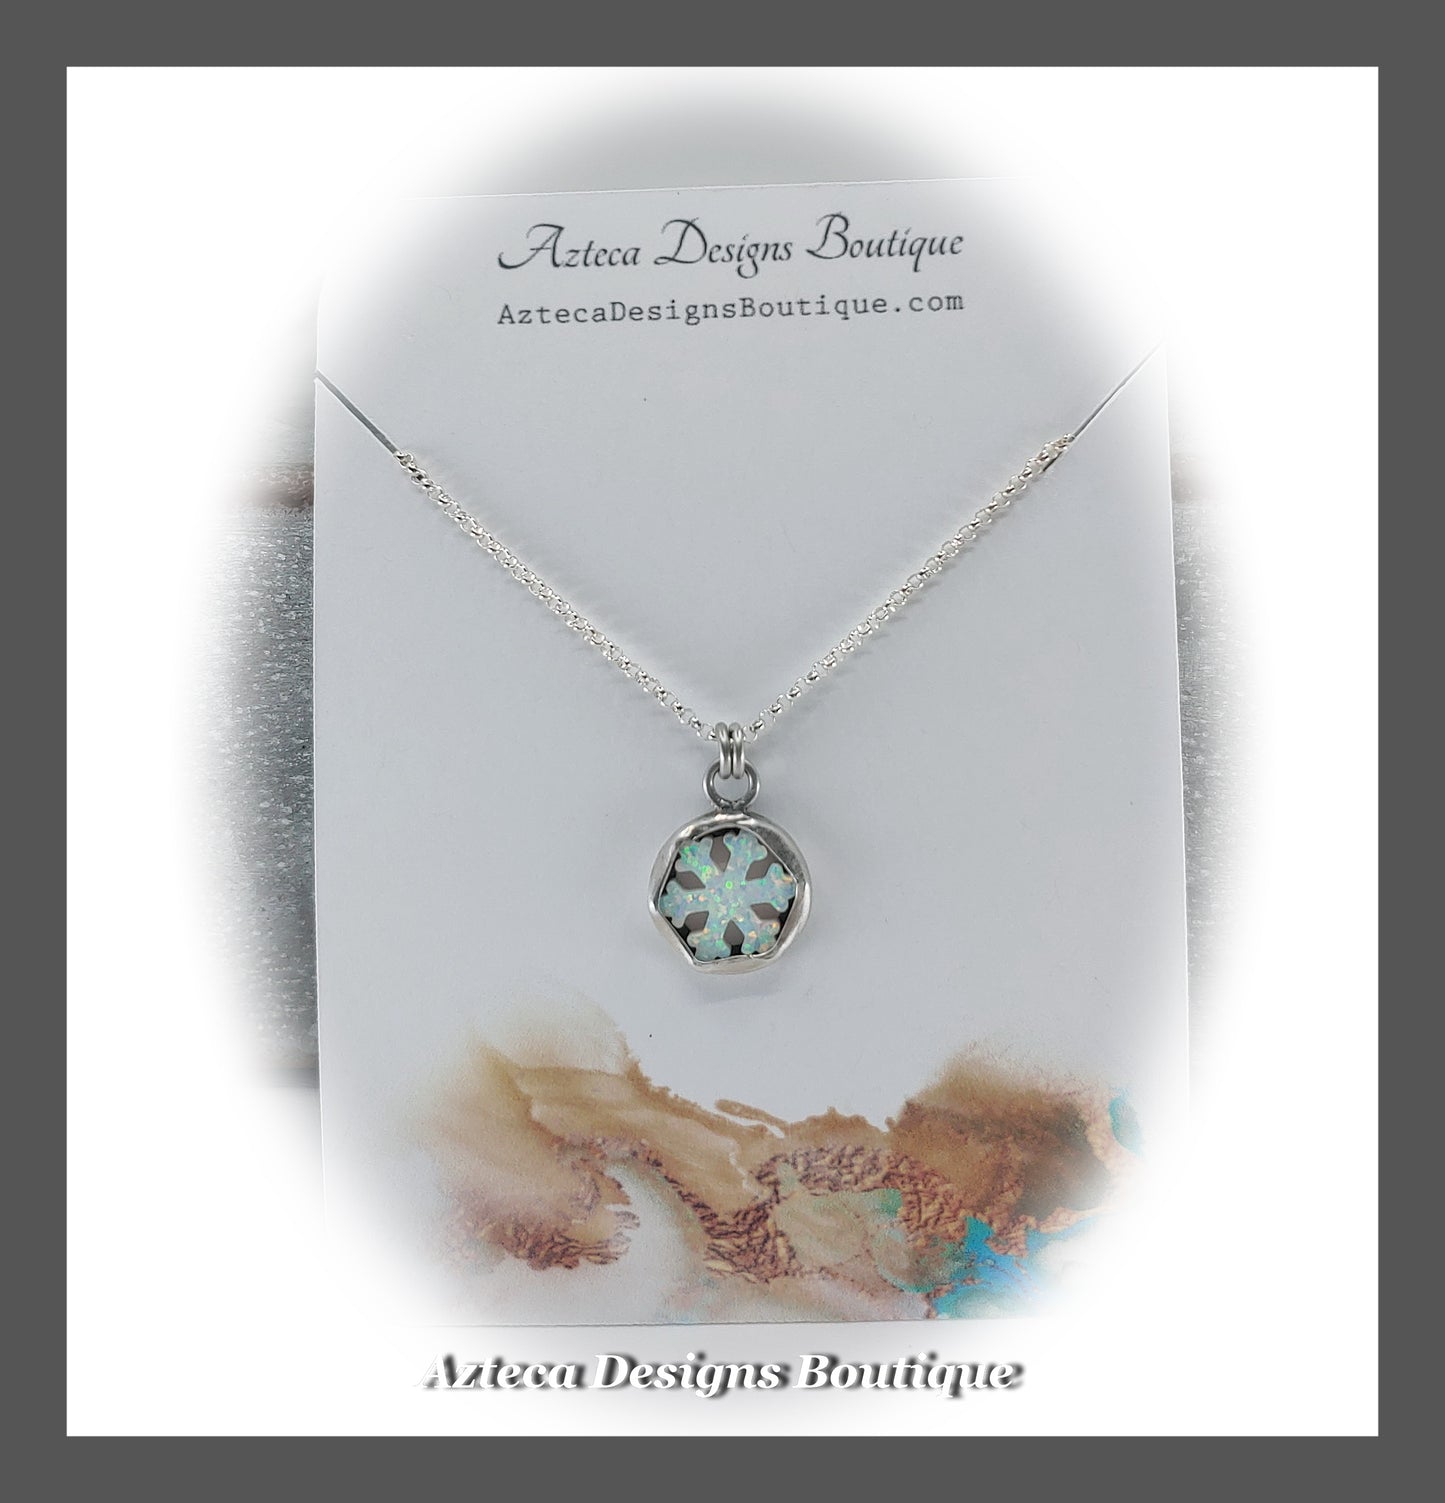 White Synthetic Opal Snowflake + Sterling Silver + Hand Fabricated Necklace